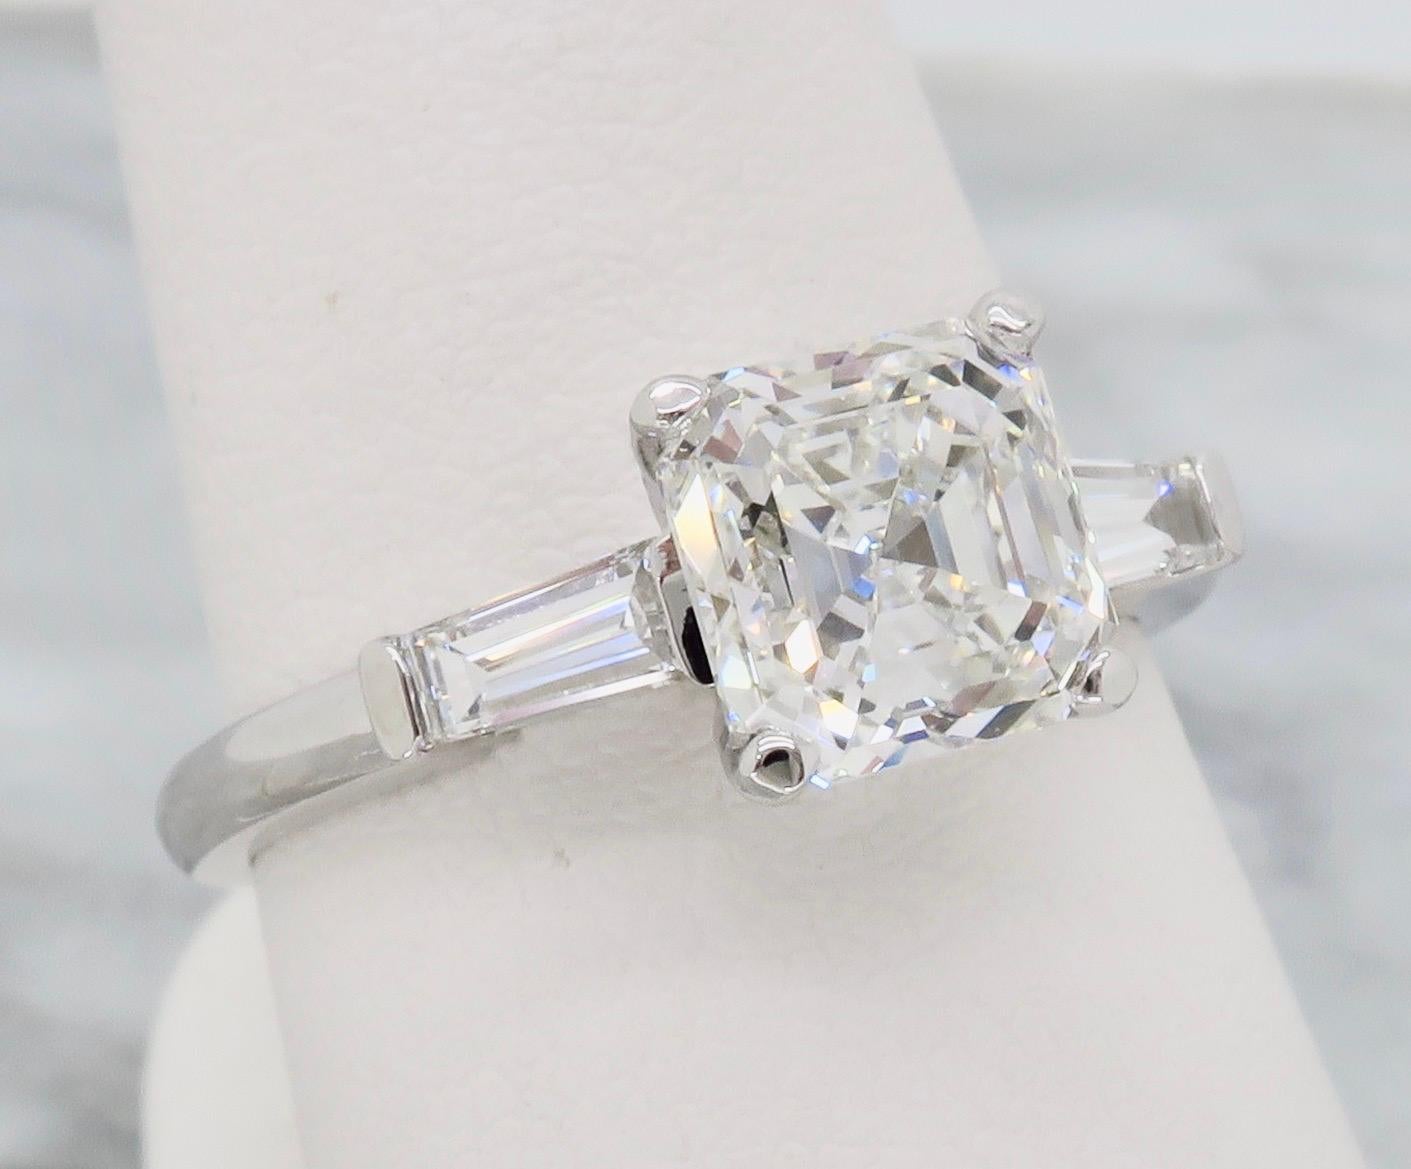 GIA Certified 1.80CT Square Emerald Cut Diamond with flanking tapered Baguette Cut diamonds crafted in 14k white gold.

GIA Certified #16297054
Center Diamond Carat Weight: 1.80CT
Center Diamond Cut: Square Emerald Cut
Center Diamond Color: F
Center